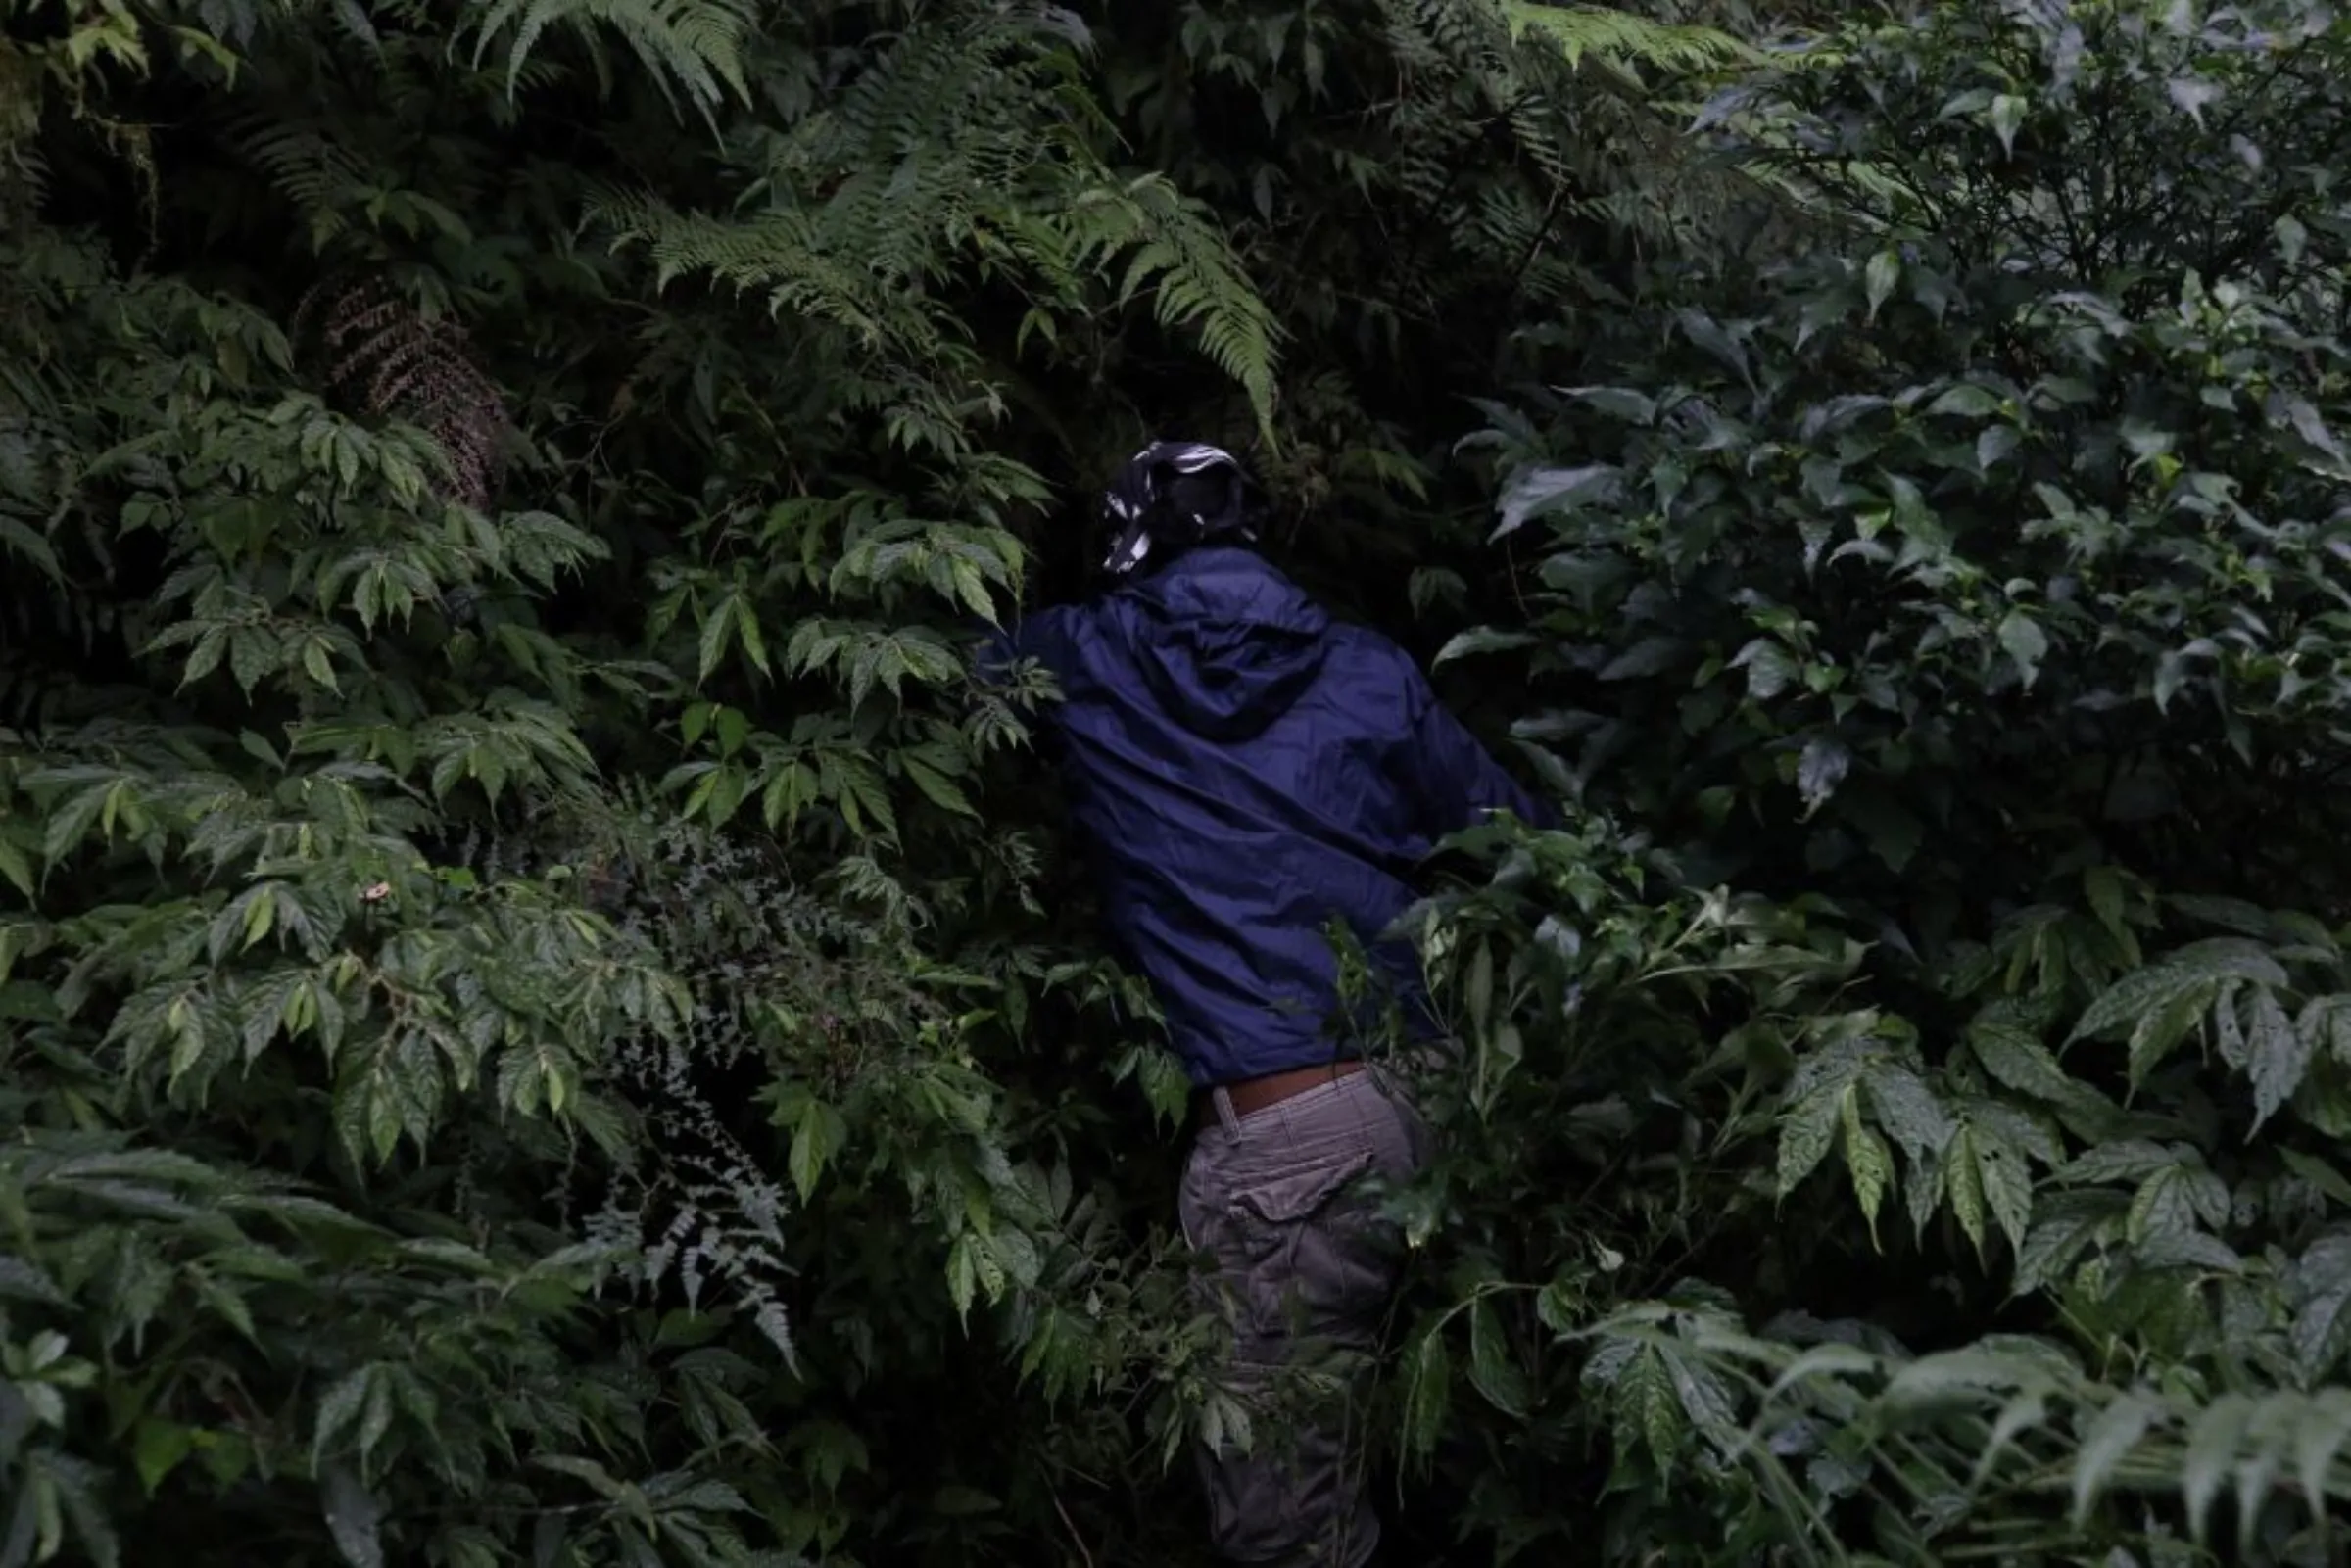 In the forests and on remote offshore islands of Taiwan, a conservationist walks through bushes to collect as many rare plant species as they can before they are lost to climate change and human encroachment, in Jin Shui forest, Pingtung, Taiwan, September 10, 2020